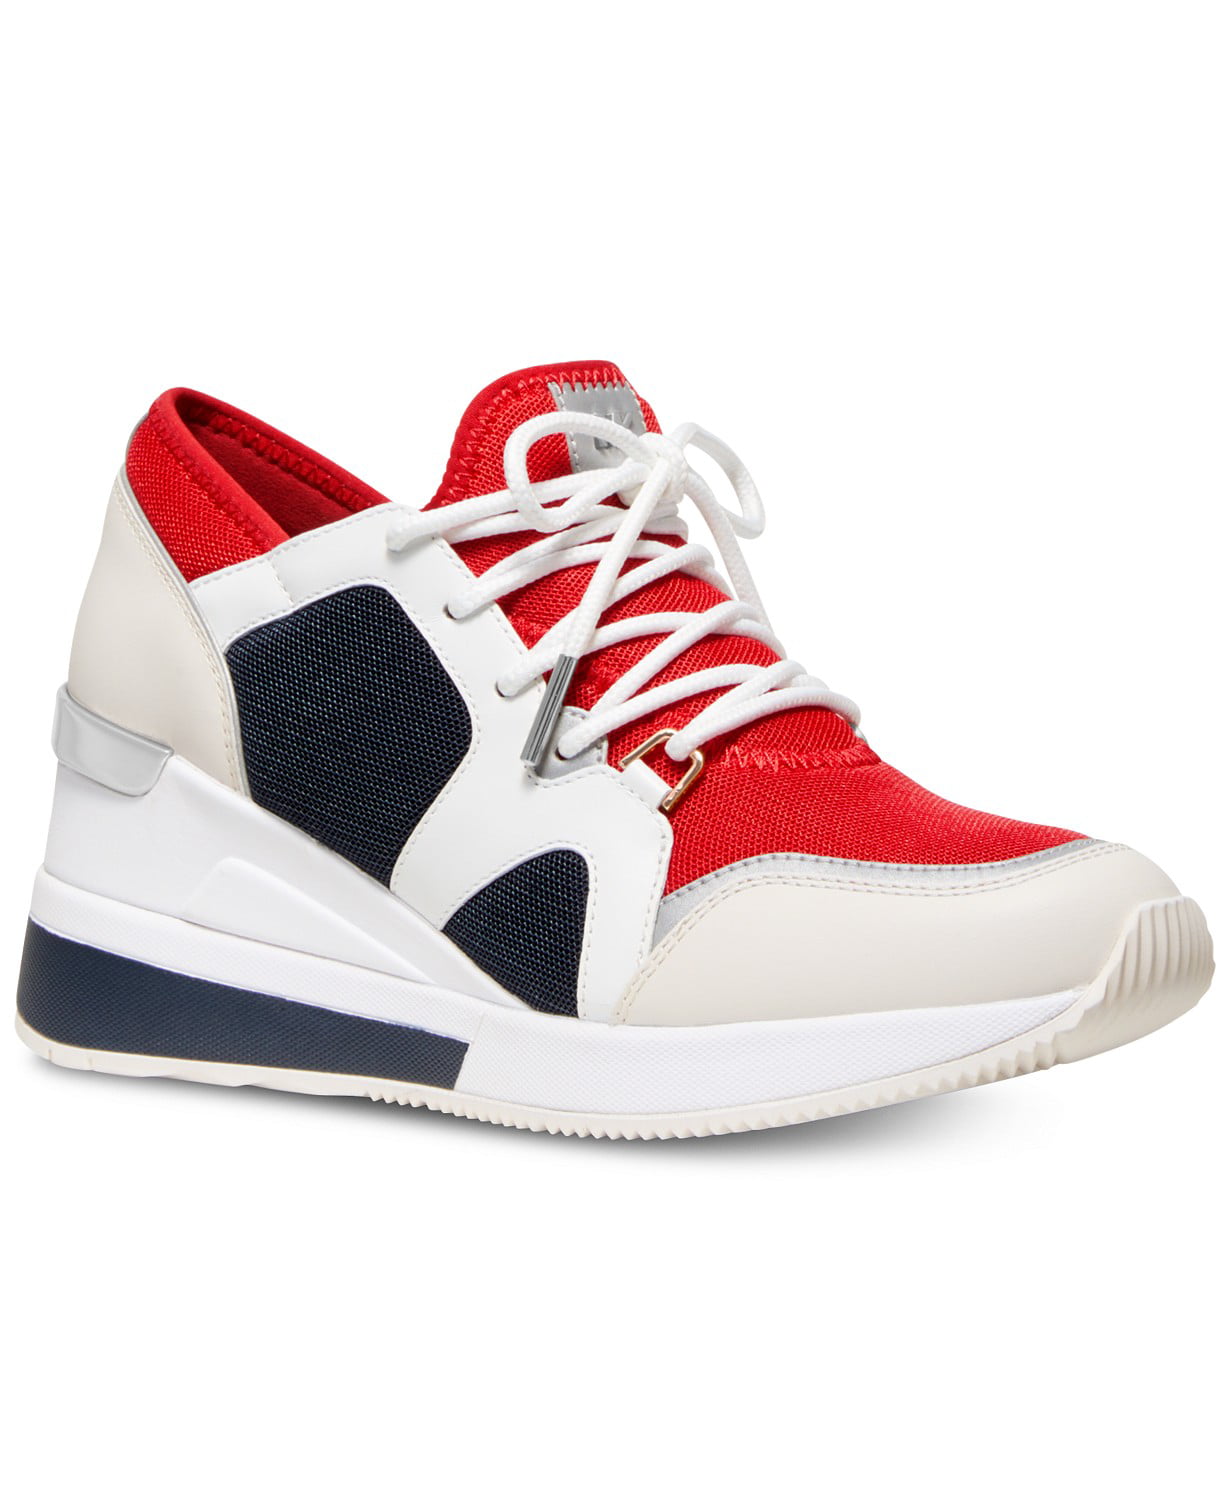 Liv Trainer Mesh Sneakers Shoes Red 